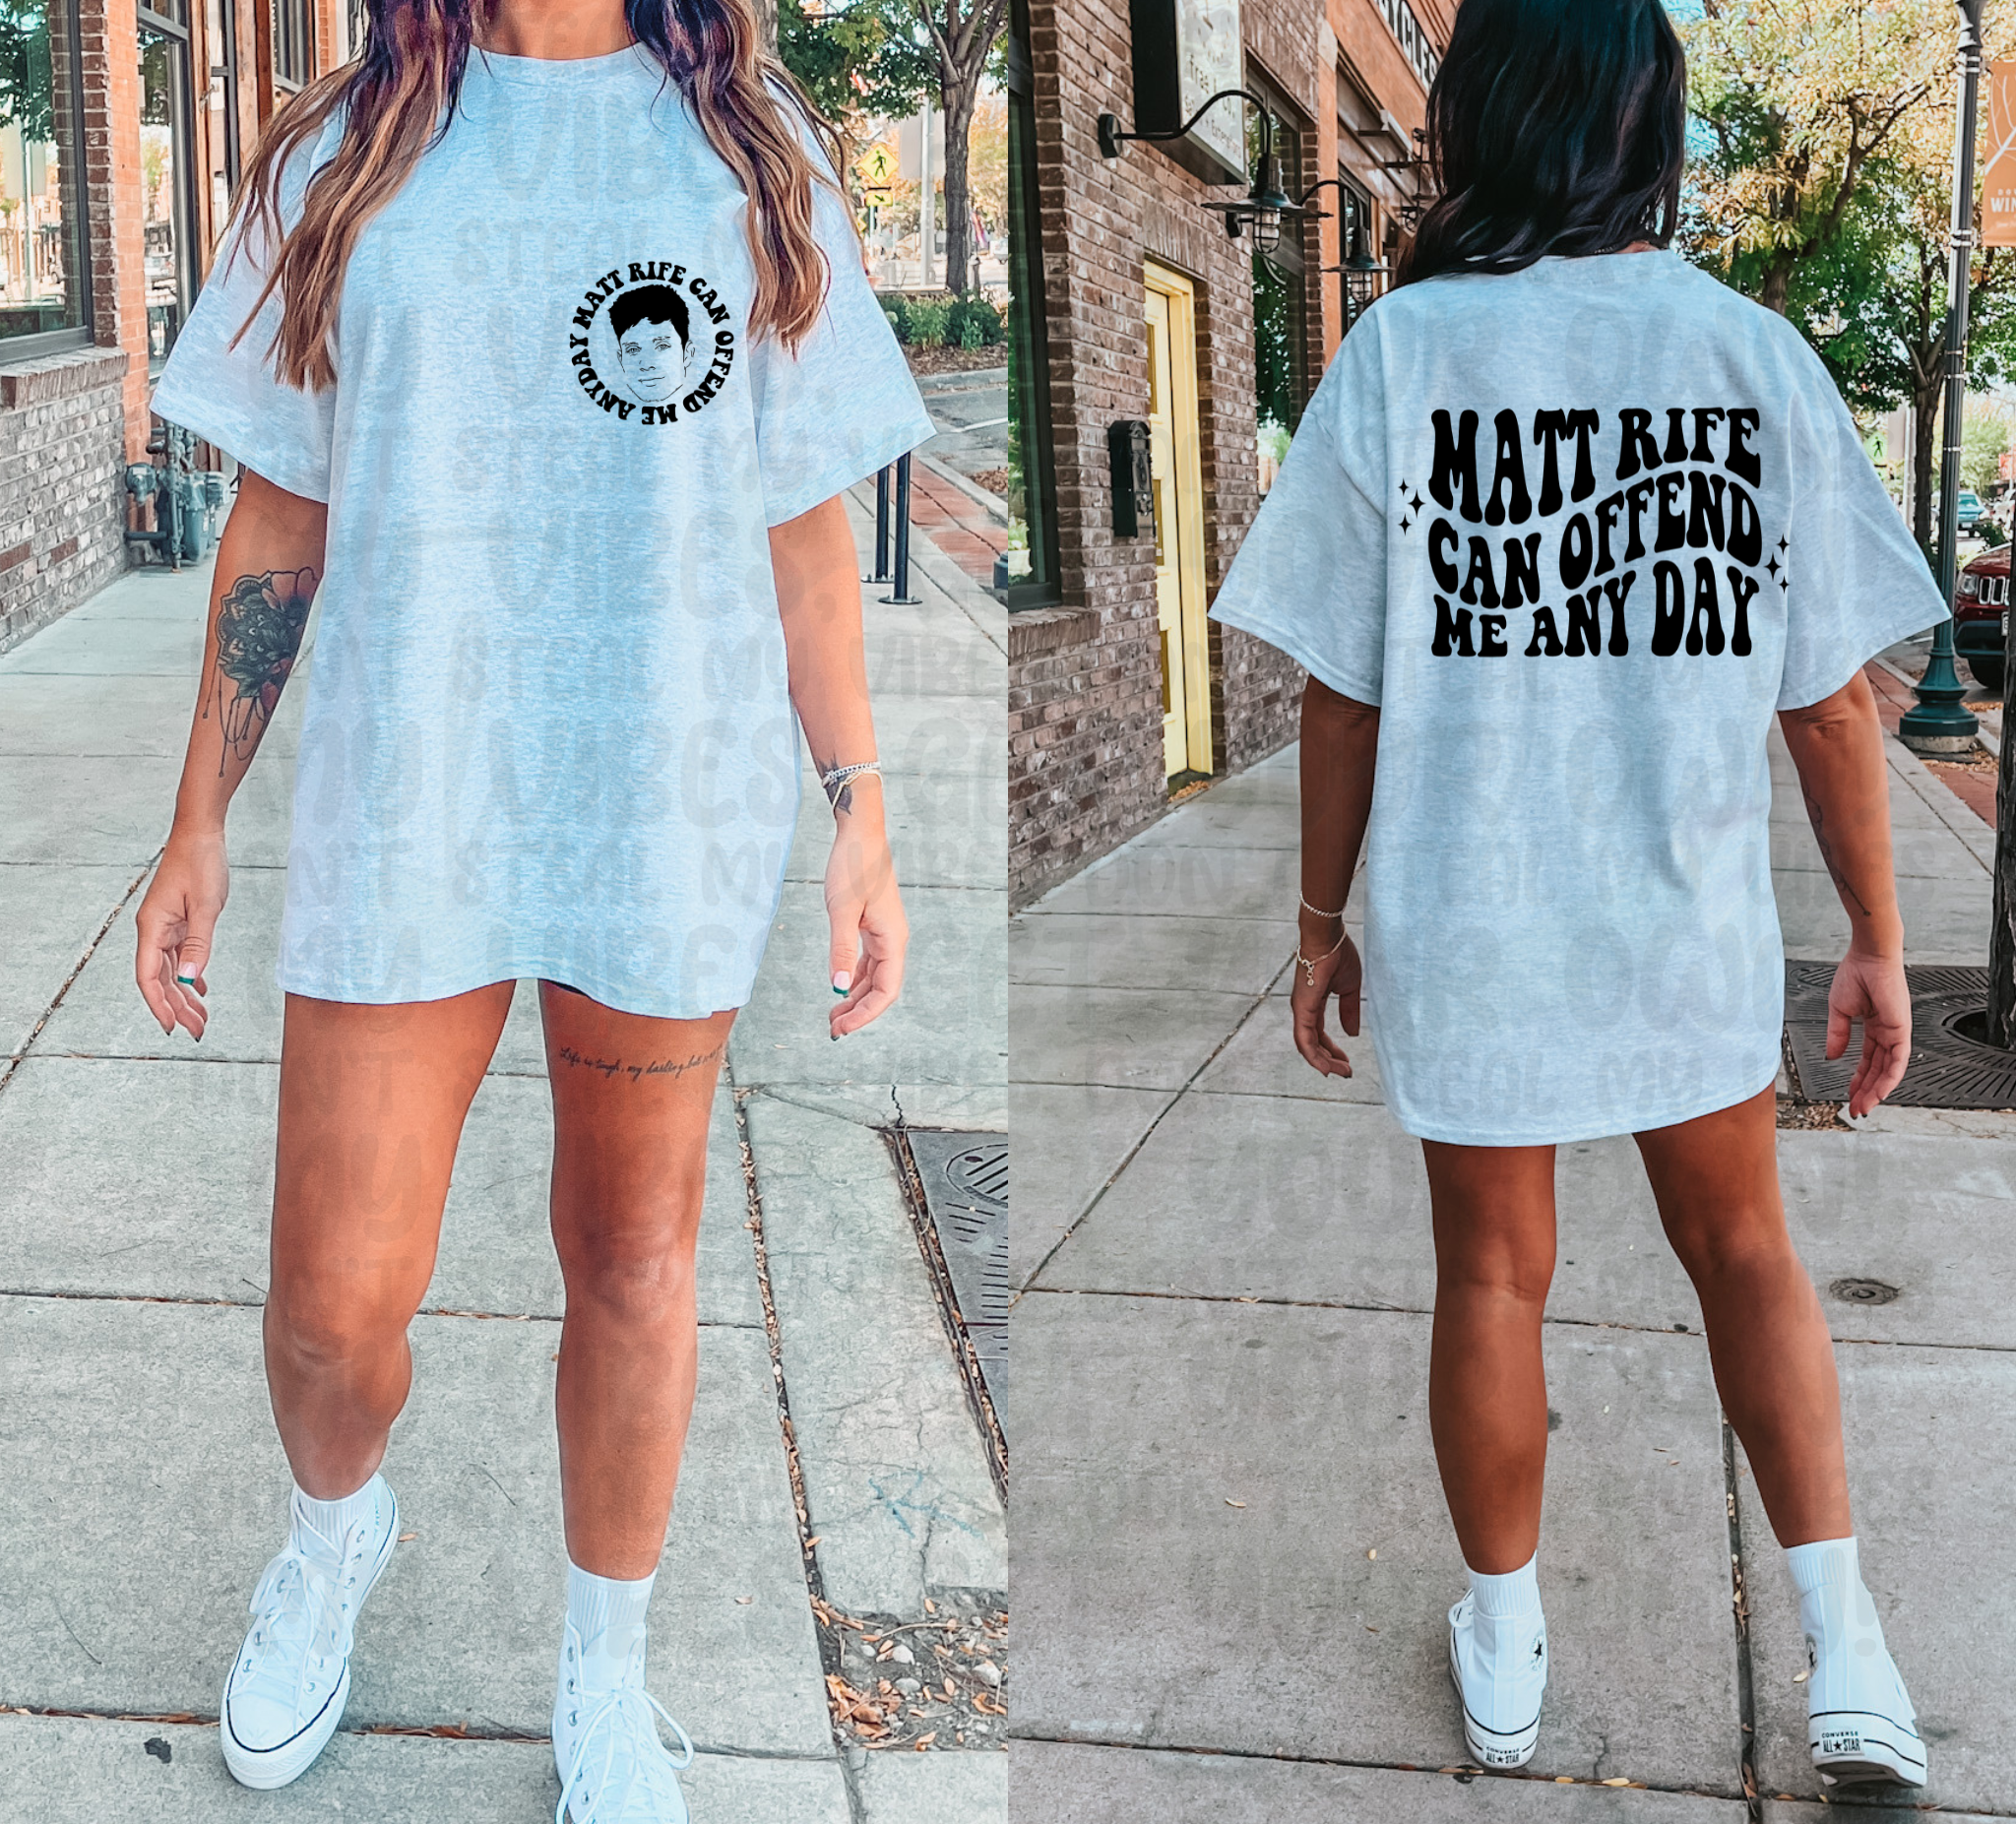 Matt Rife Can Offend Me Any Day (Front & Back) Top Design